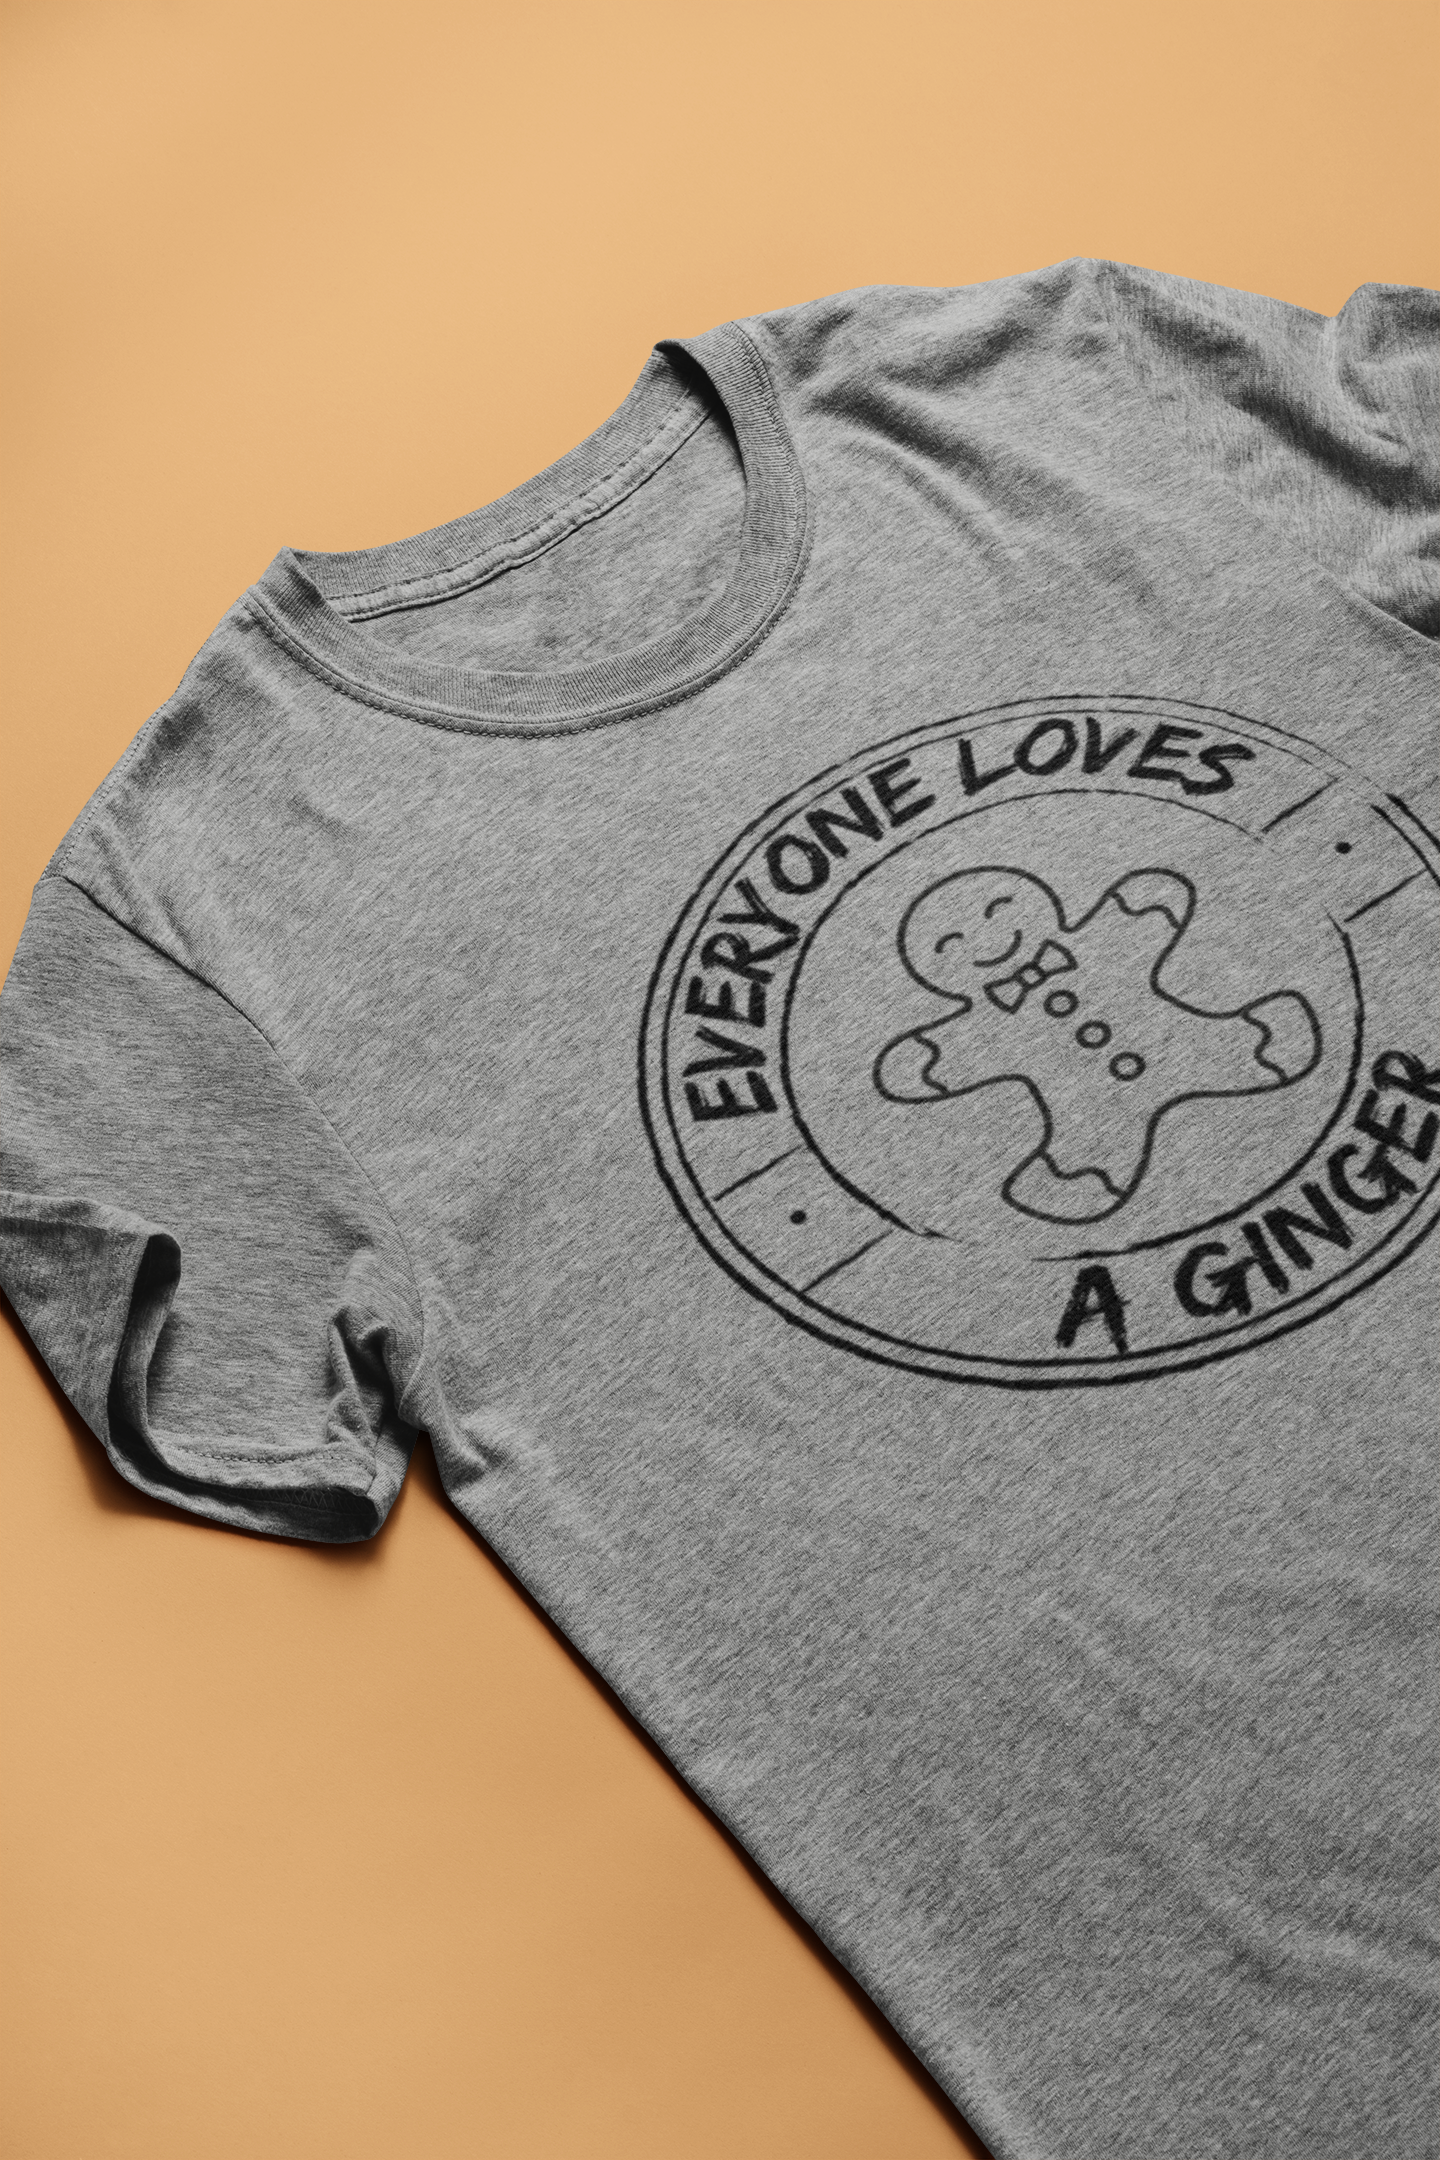 Everyone Loves a Ginger Tee